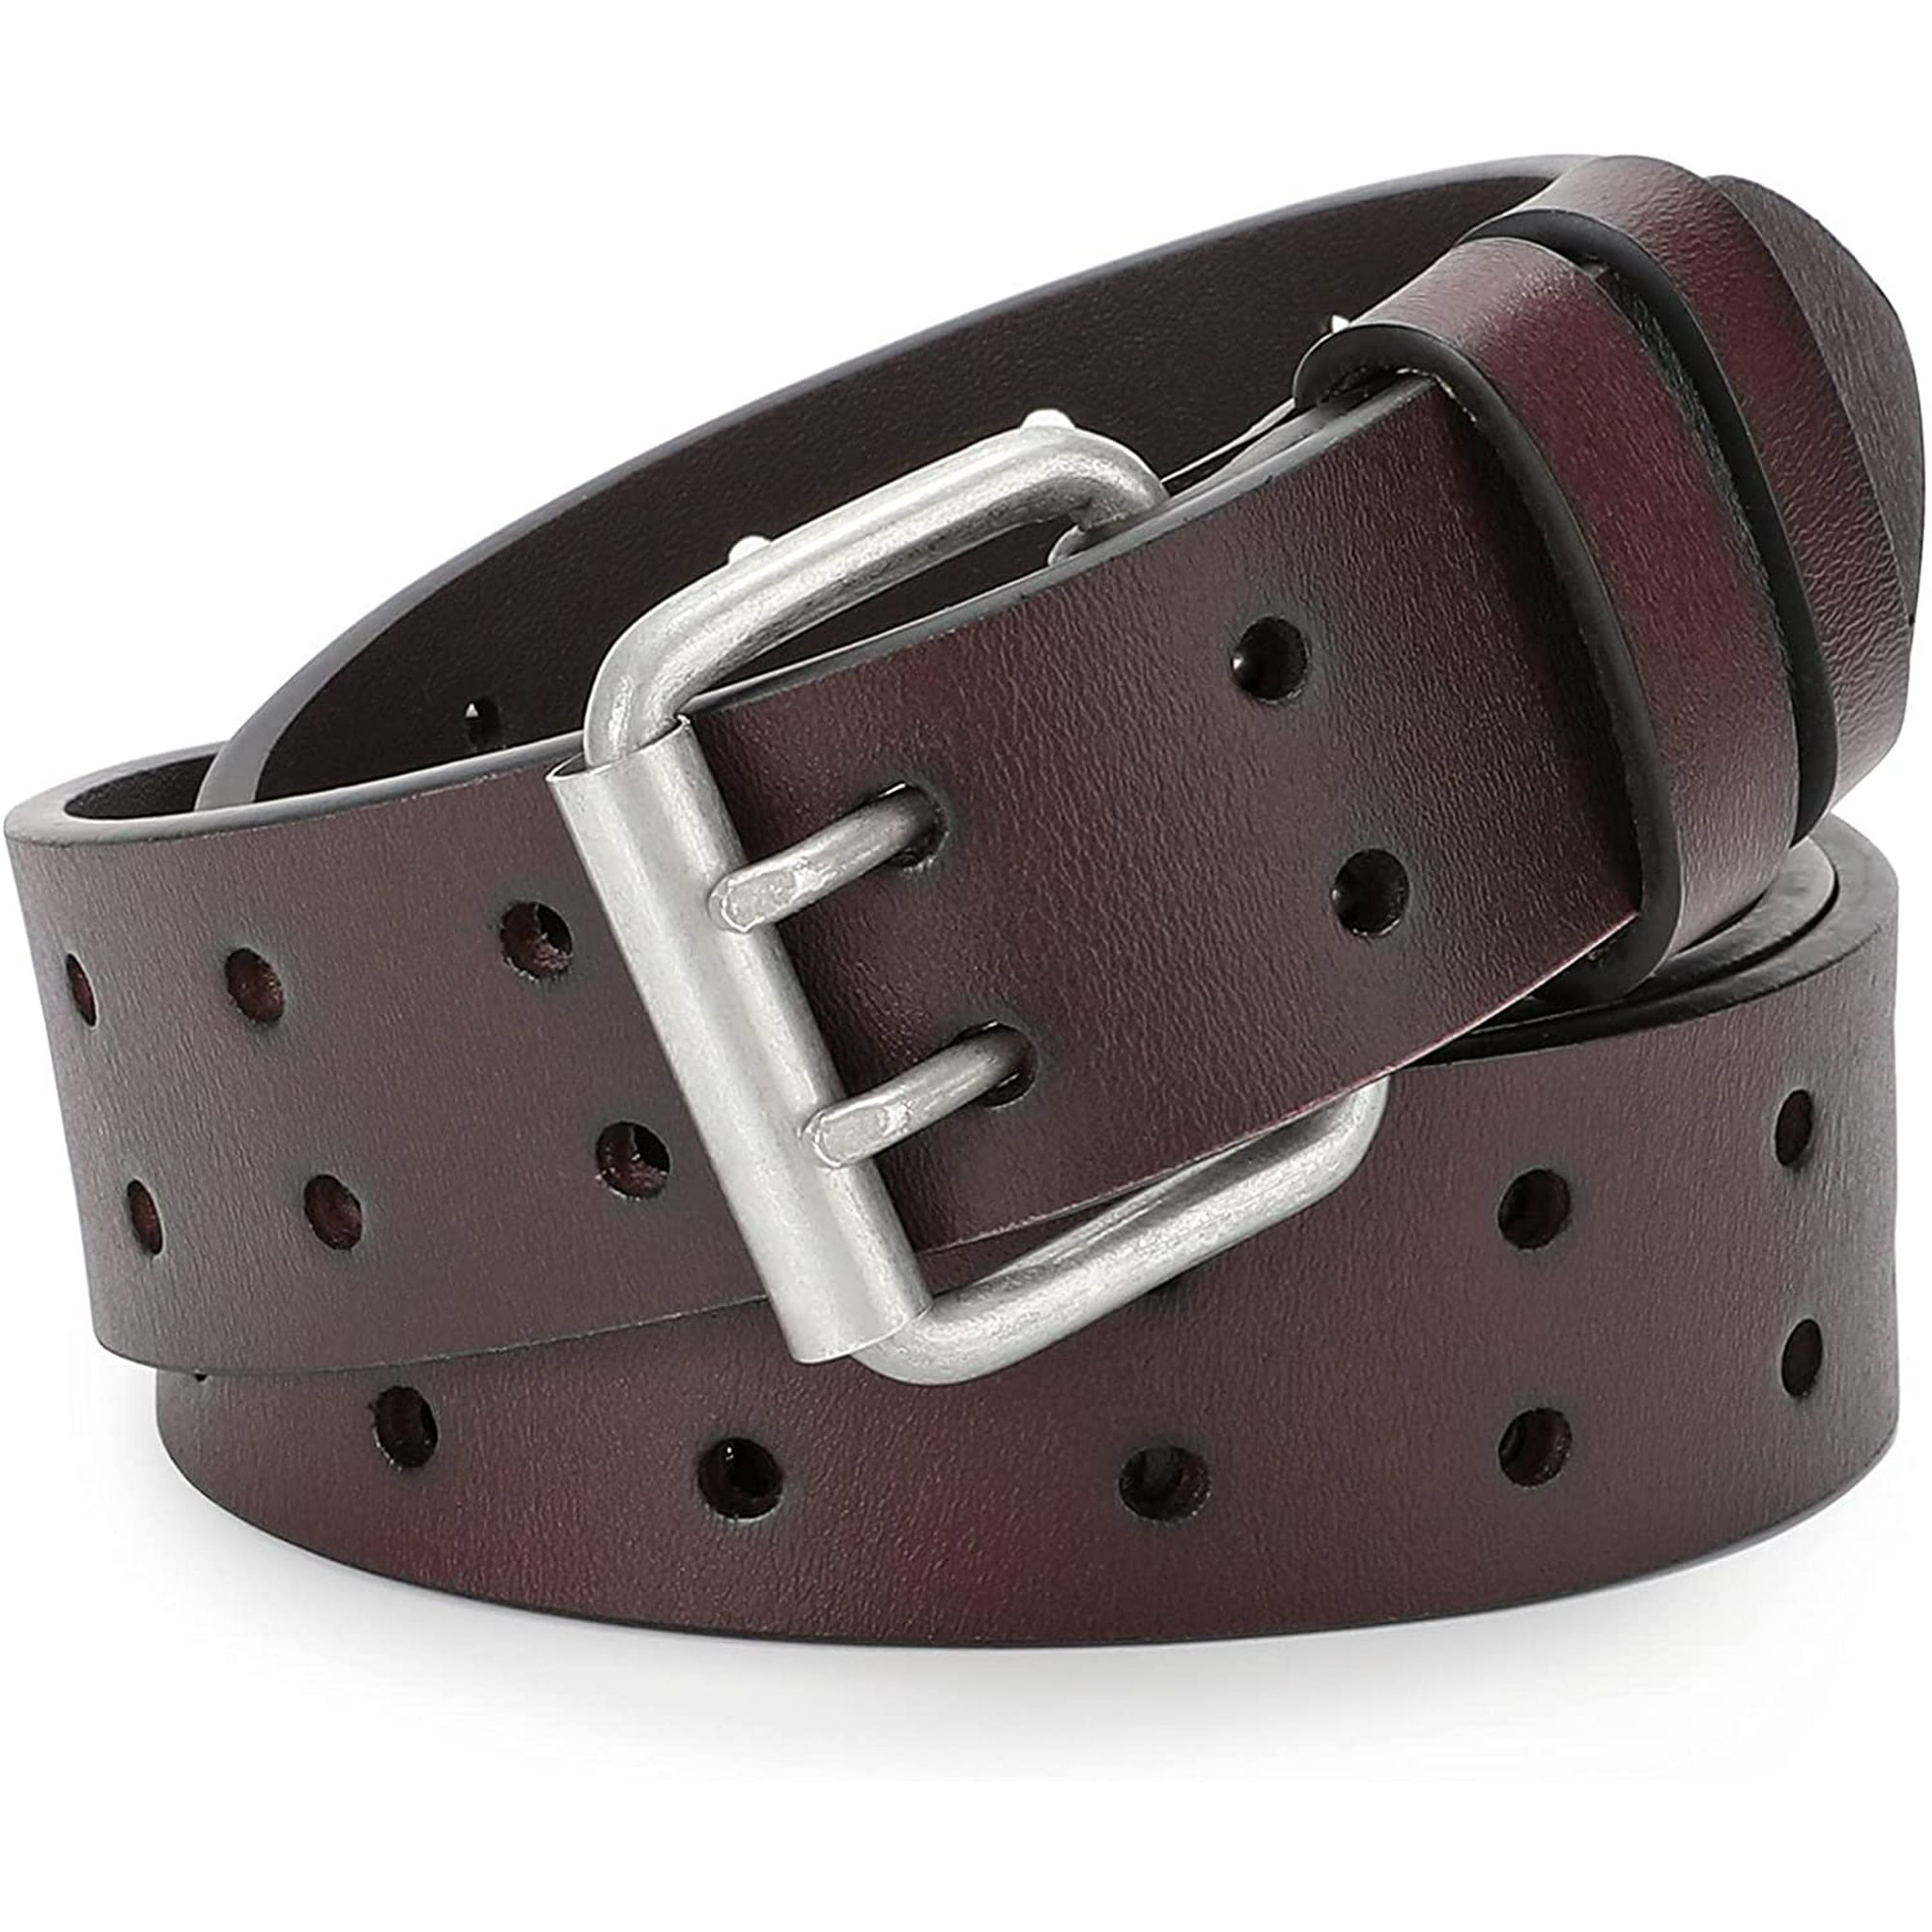 Men's Double Prong Belt, 2 Holes Leather Jeans Belt for Men 1.57 inches  Wide | Walmart Canada